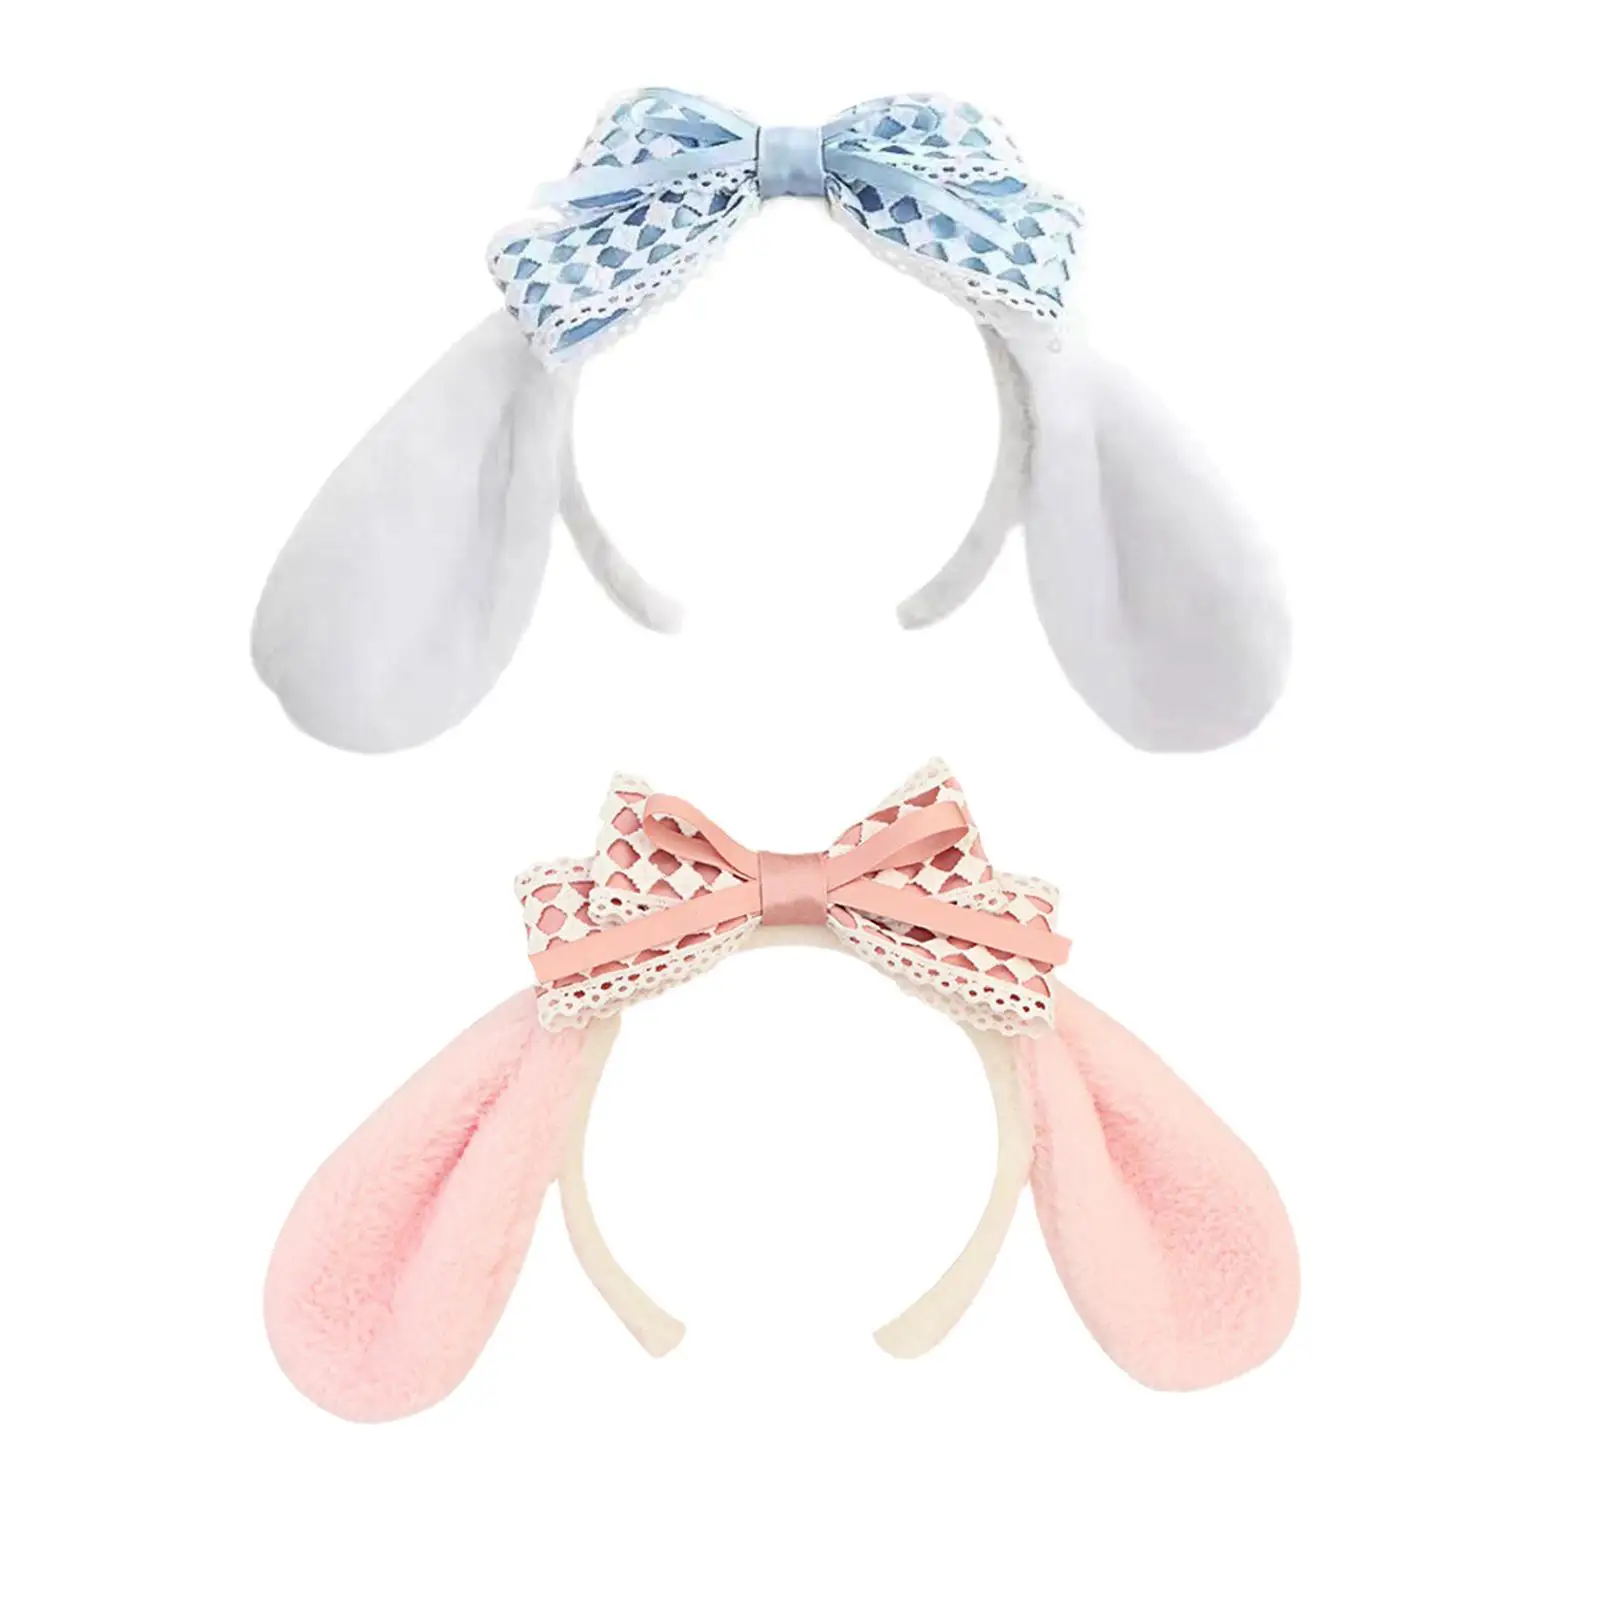 

Bunny Ears Headband Hair Accessorie Party Hair Band Headwear Headpiece Photo Props Dress up Easter Party Favors for Decor